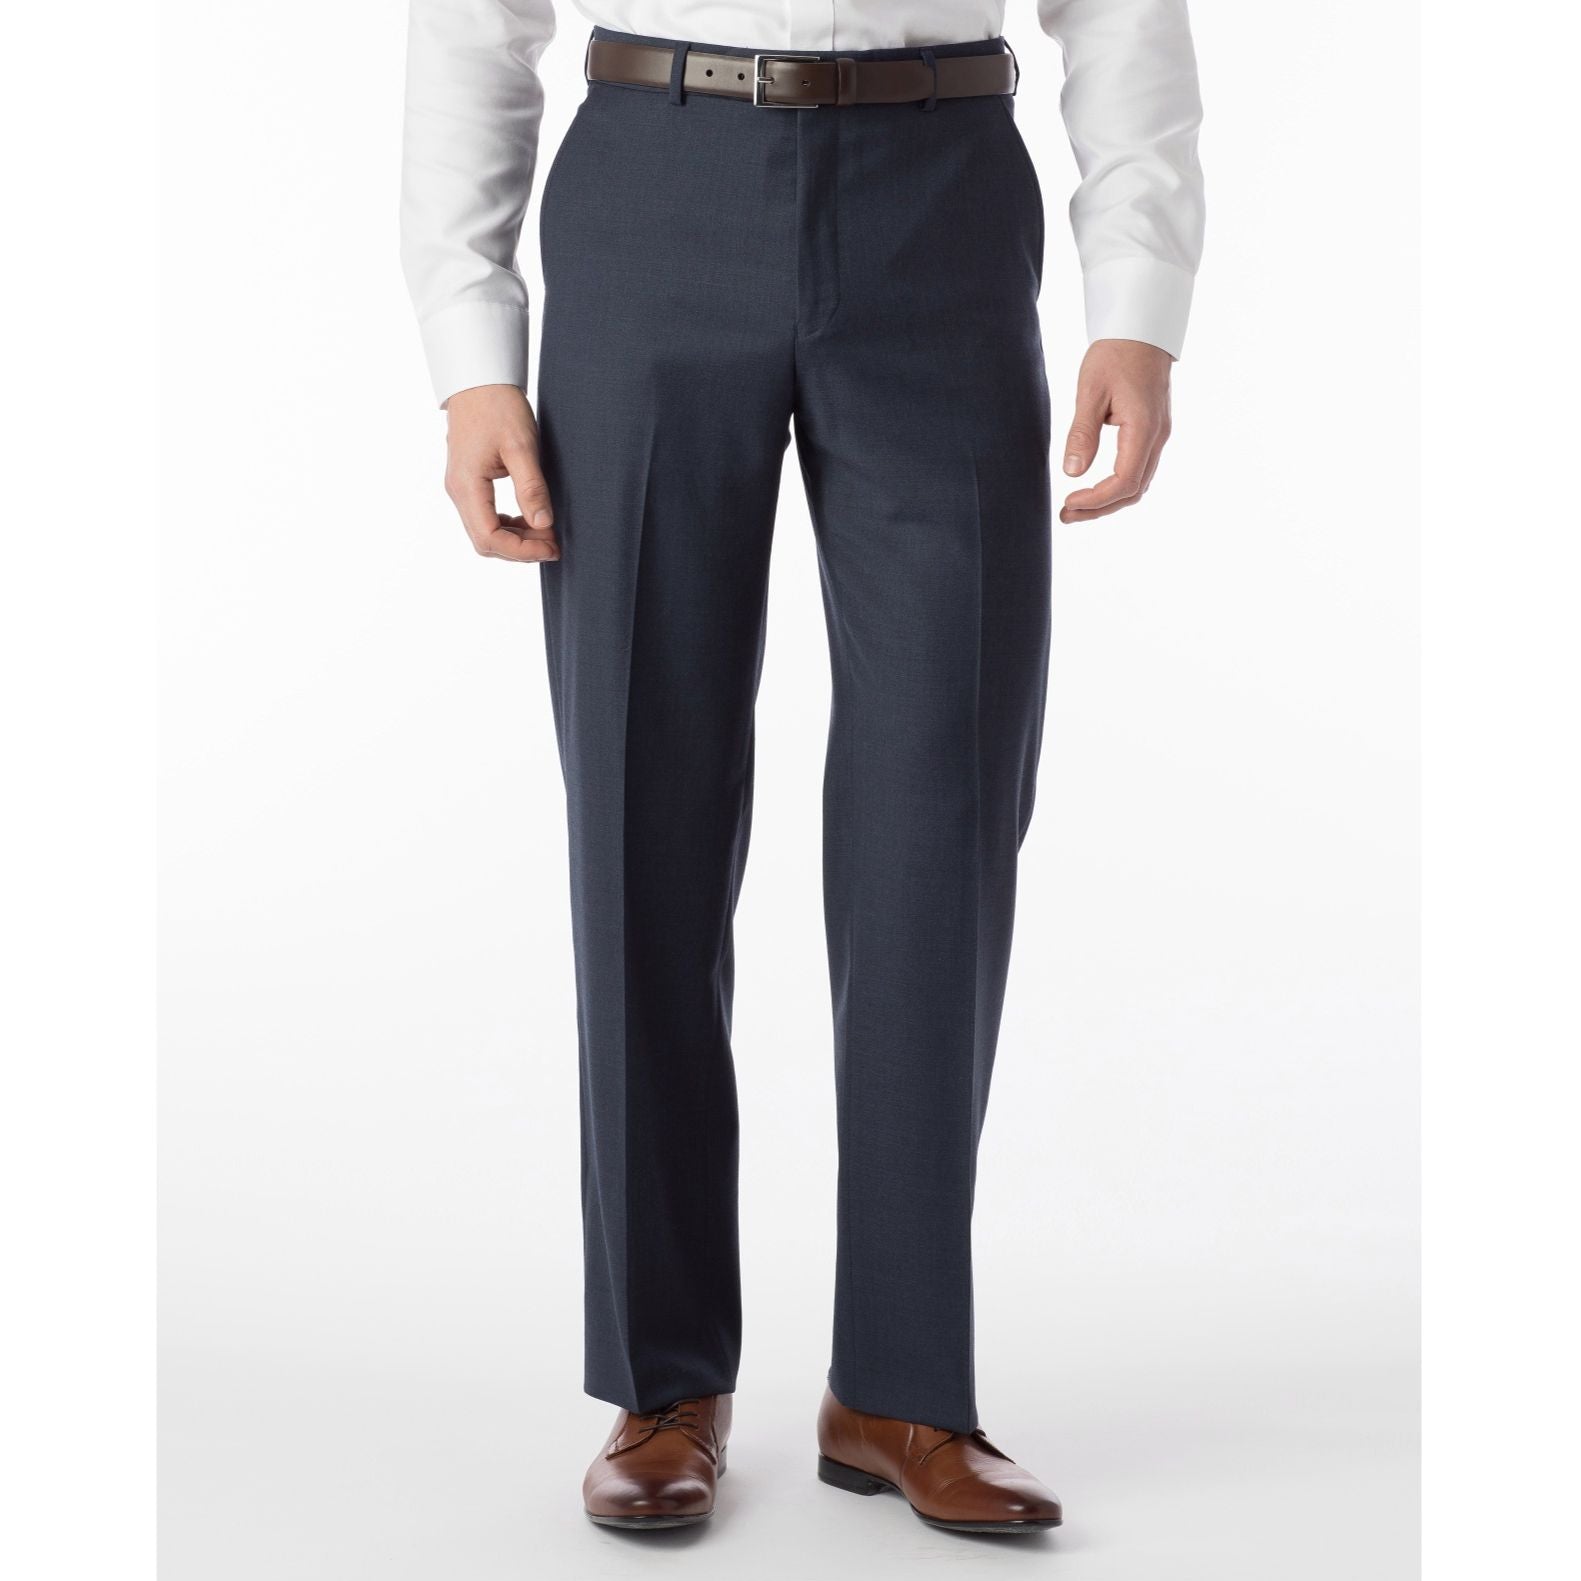 Super 120s Luxury Wool Serge Comfort-EZE Trouser in Navy Mix (Flat Front Models) by Ballin